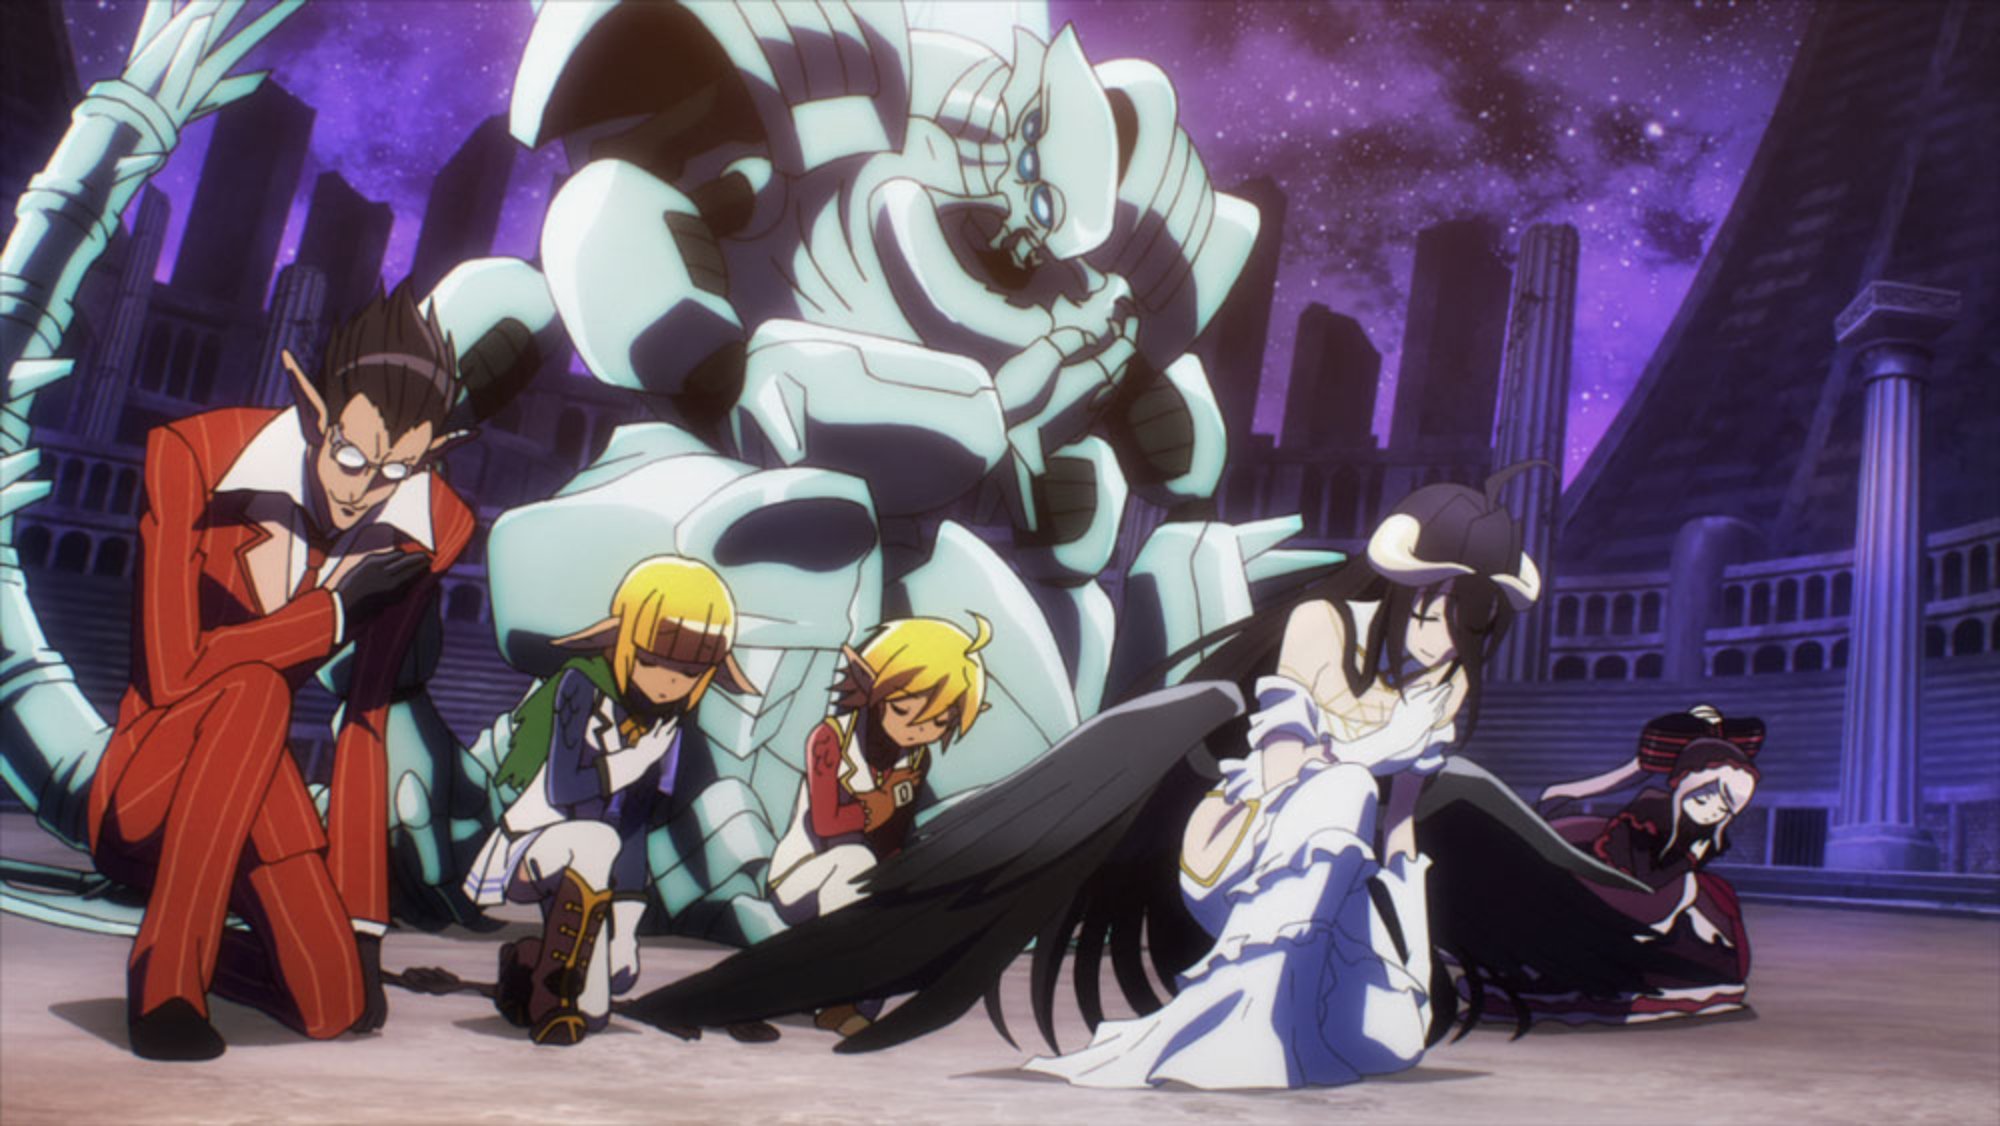 'Overlord' Demiurge (voiced by Masayuki Katô), Aura (voiced by Emiri Kato), Mare (voiced by Yumi Uchiyama), Cocytus (voiced by Kenta Miyake), Albedo (voiced by Yumi Hara), Shalltear (voiced by Sumire Uesaka) bow to chair.